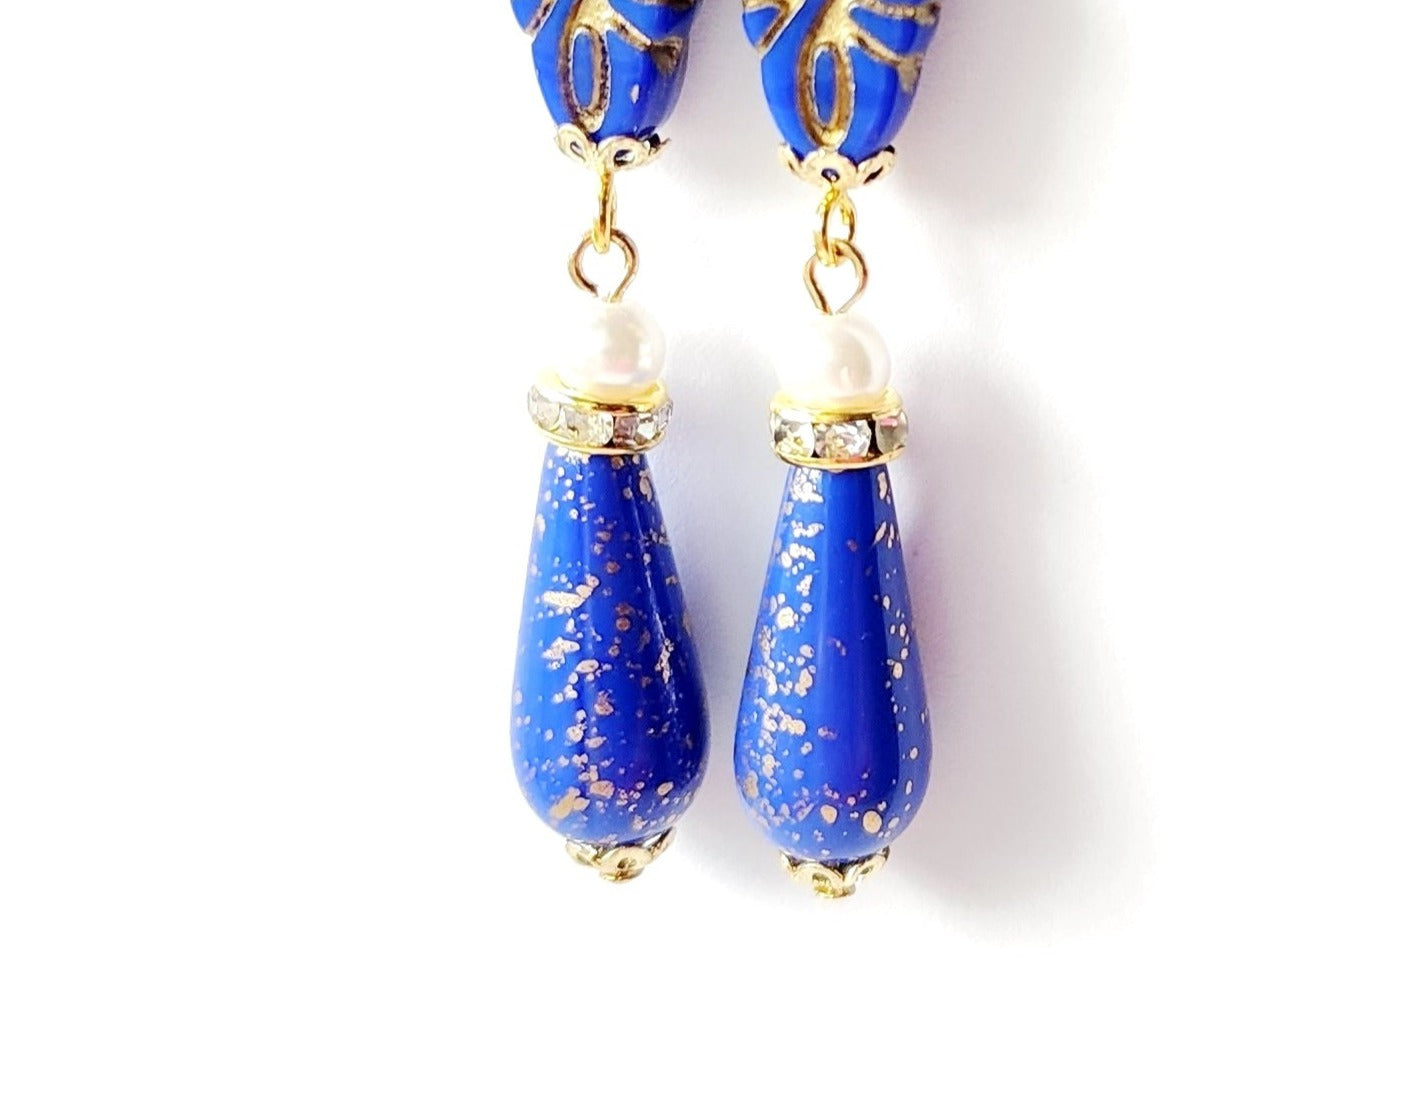 Long Art Deco Style Lapis Blue Glass and Pearl Dangle Earrings 